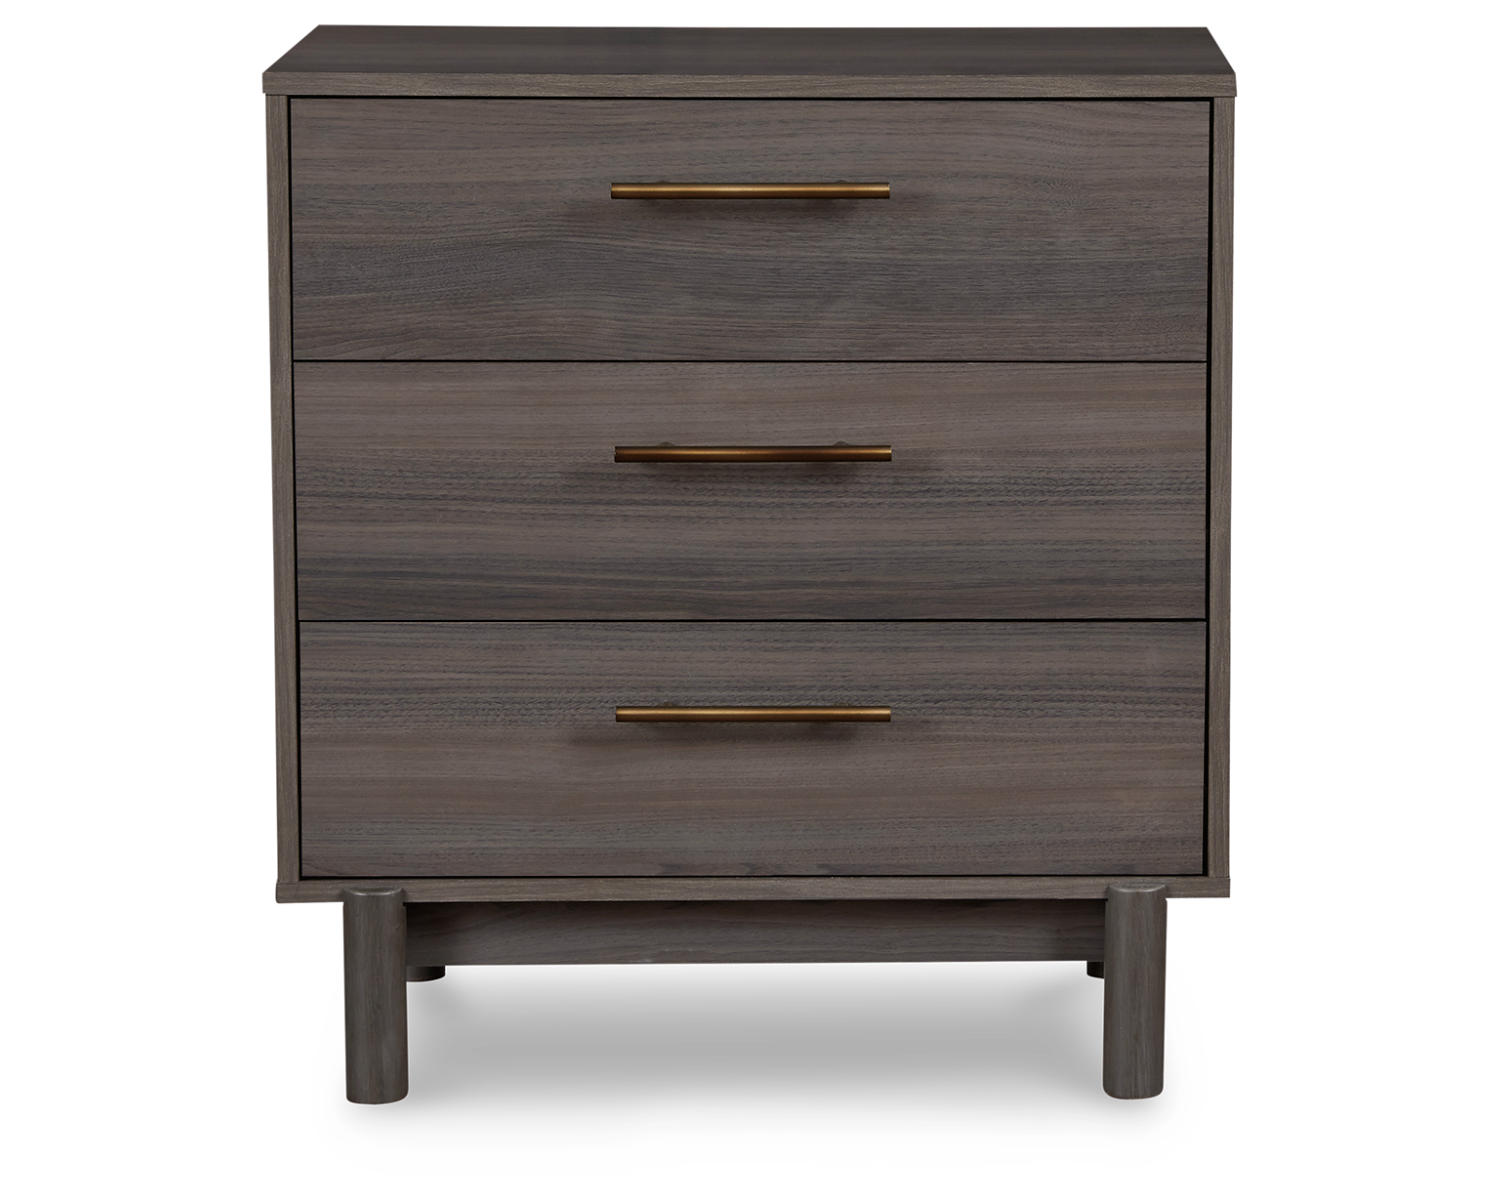 Signature Design by Ashley Brymont Mid-Century Modern 3 Drawer Chest of Drawers, Dark Gray - image 4 of 6